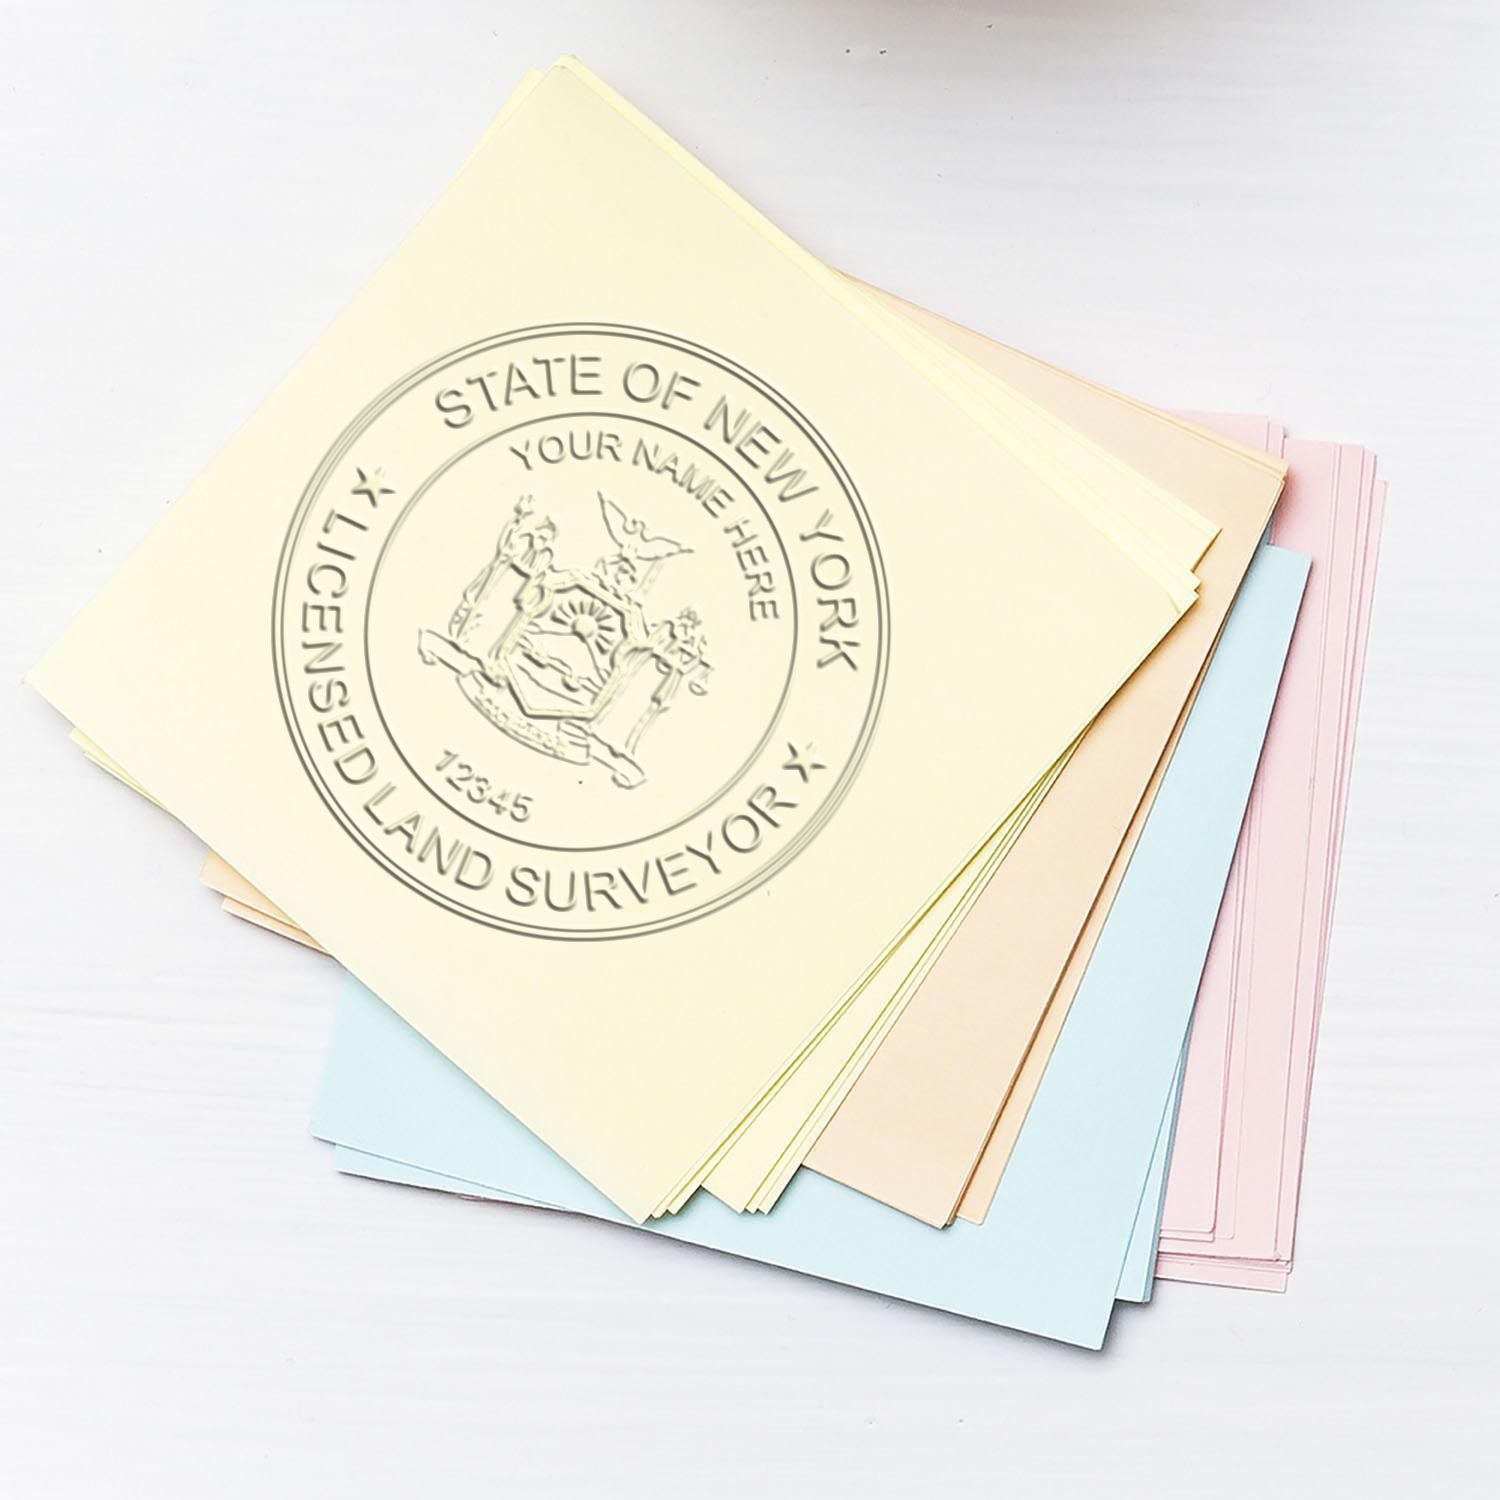 An alternative view of the Handheld New York Land Surveyor Seal stamped on a sheet of paper showing the image in use